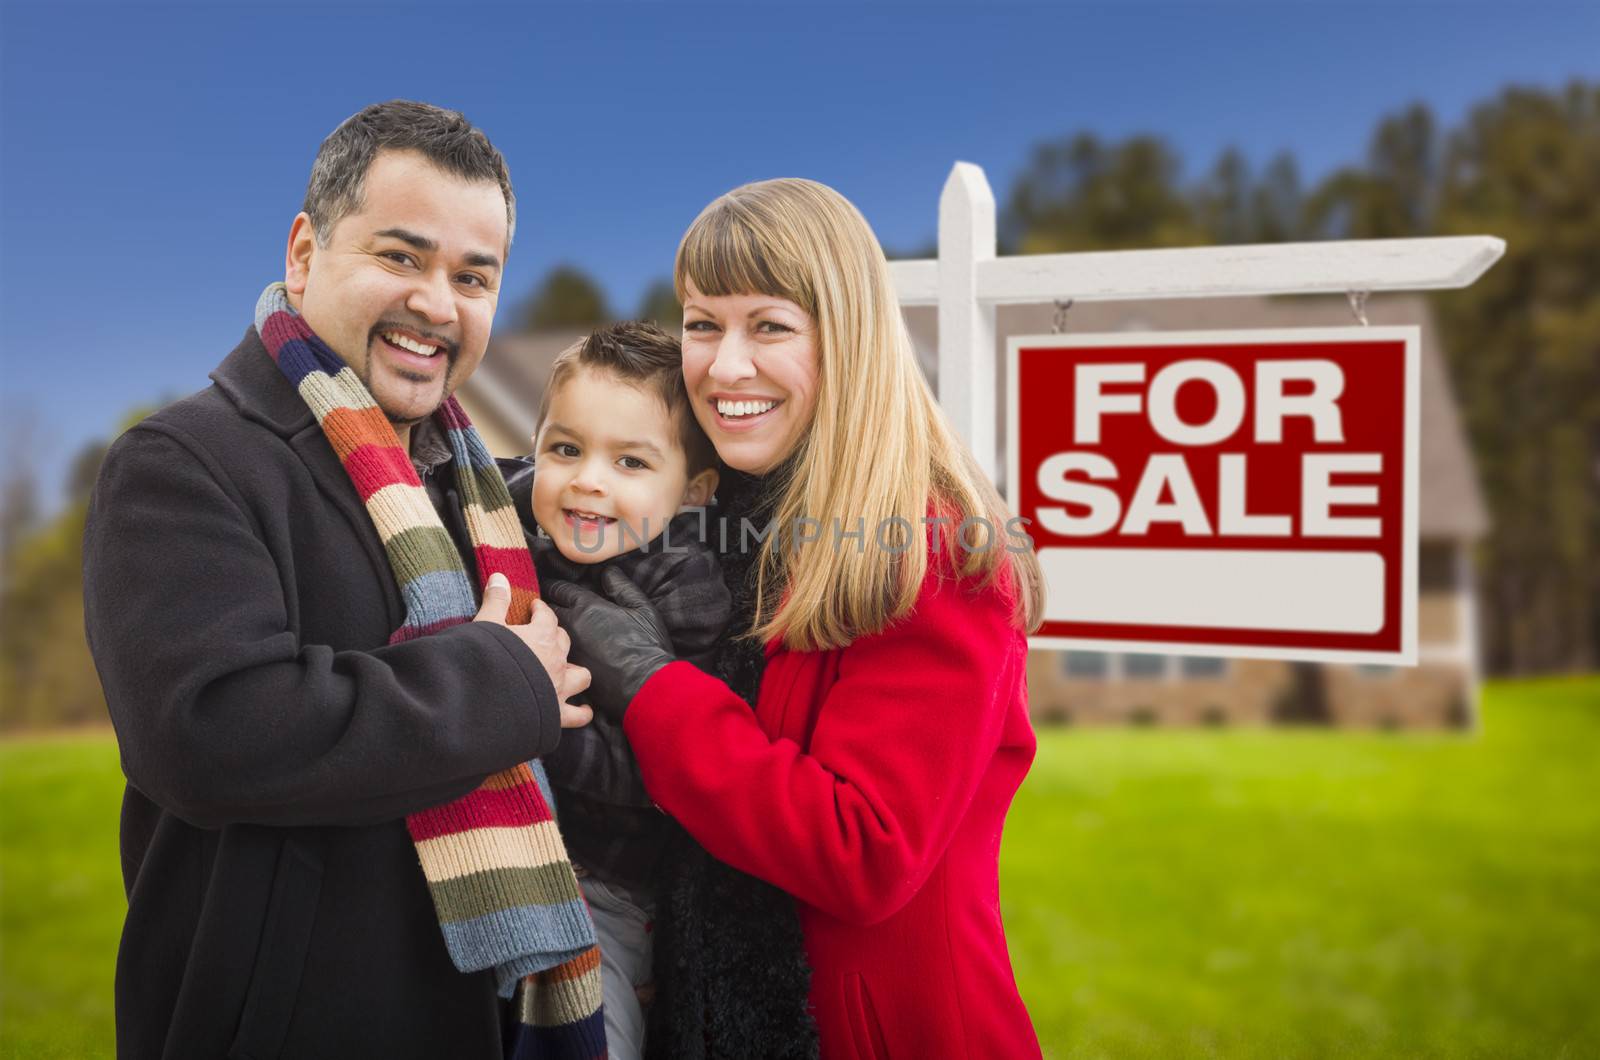 Warmly Dressed Young Mixed Race Family in Front of Home For Sale Real Estate Sign and House.